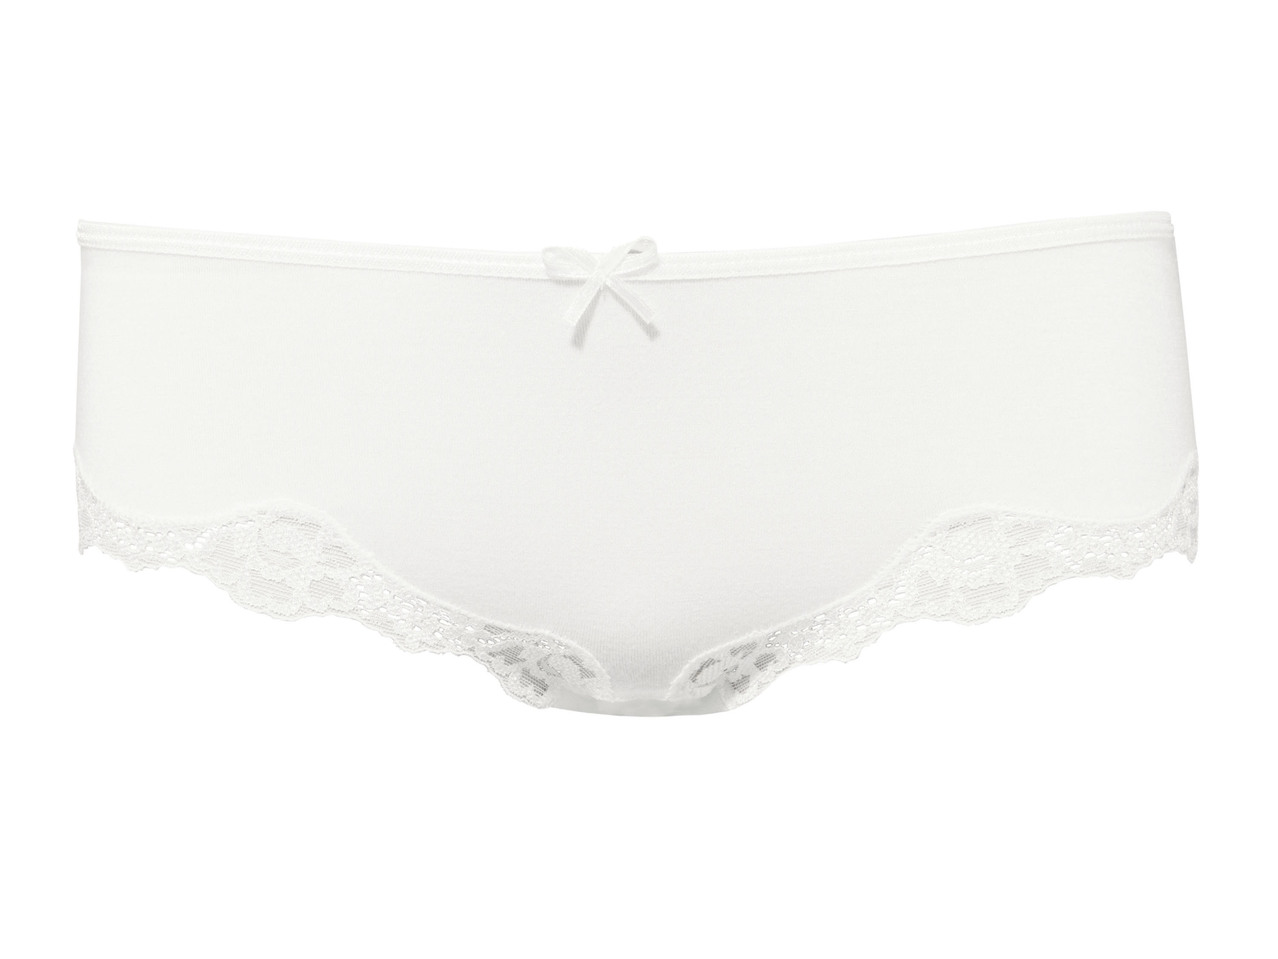 Ladies' Lace Hipster Briefs or Briefs